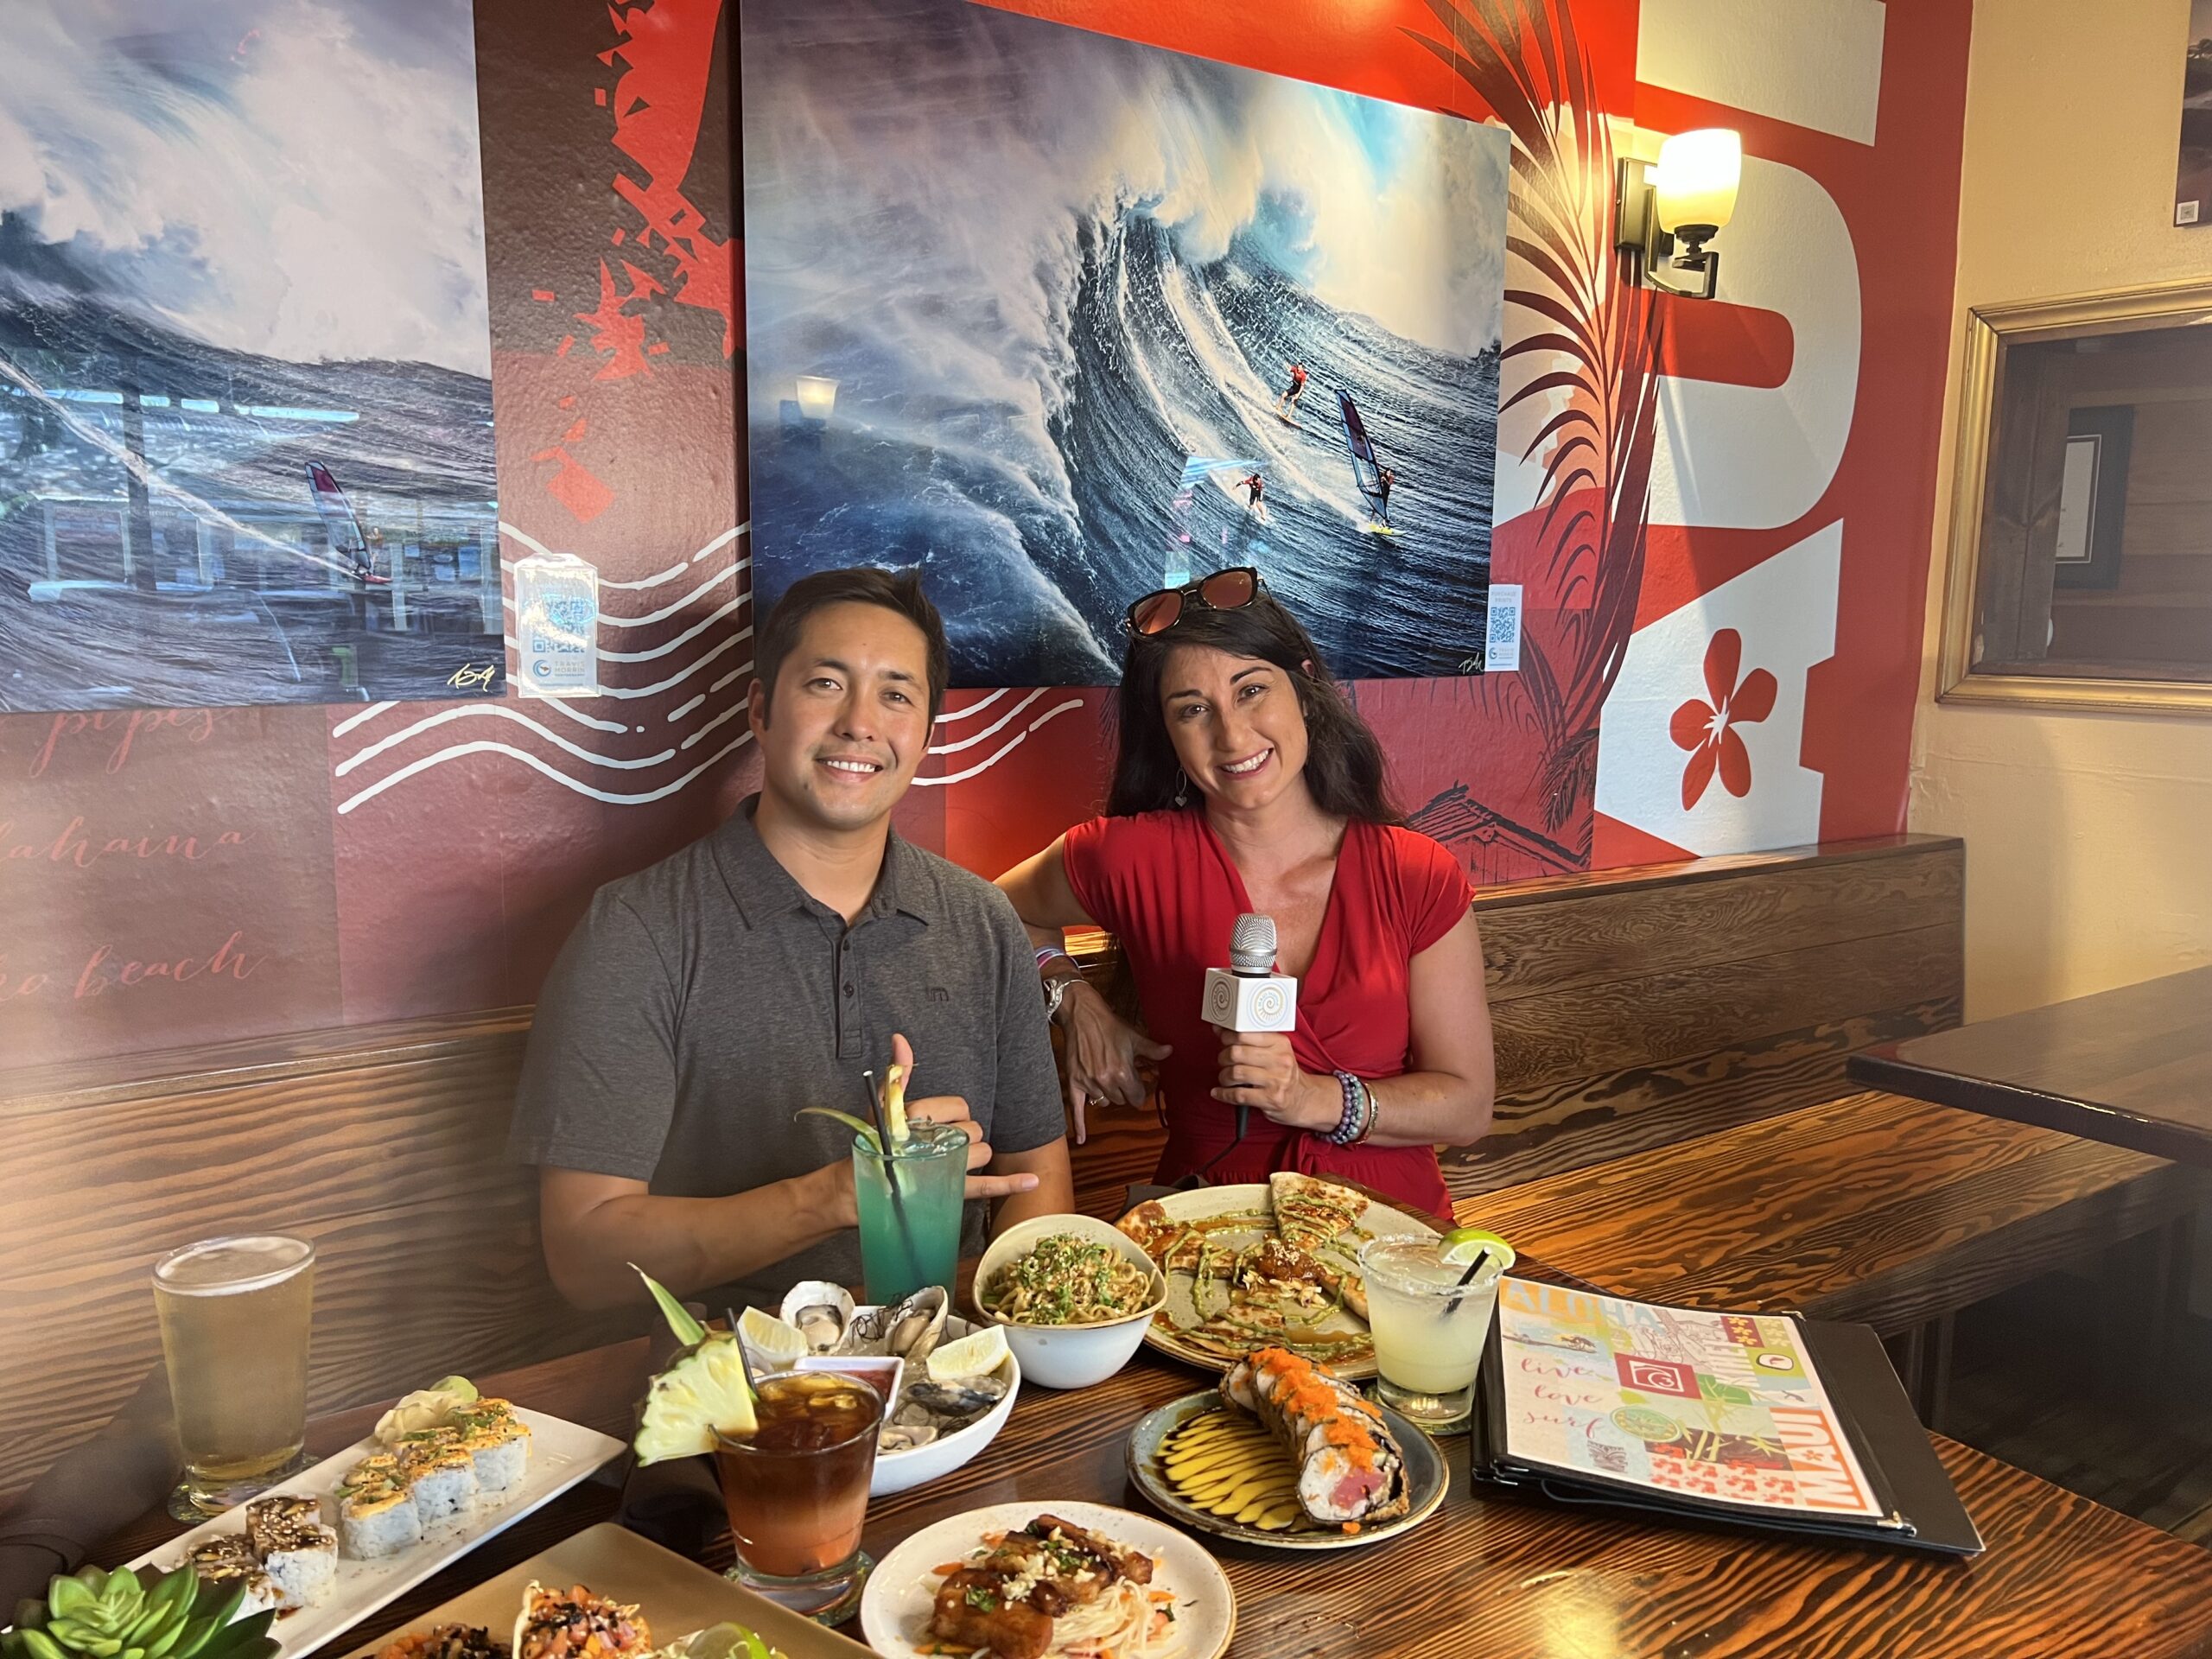 Three's co-owner/chef Travis Morrin and Maui Inspired host Kiaora Bohlool with Happy Hour food and drinks